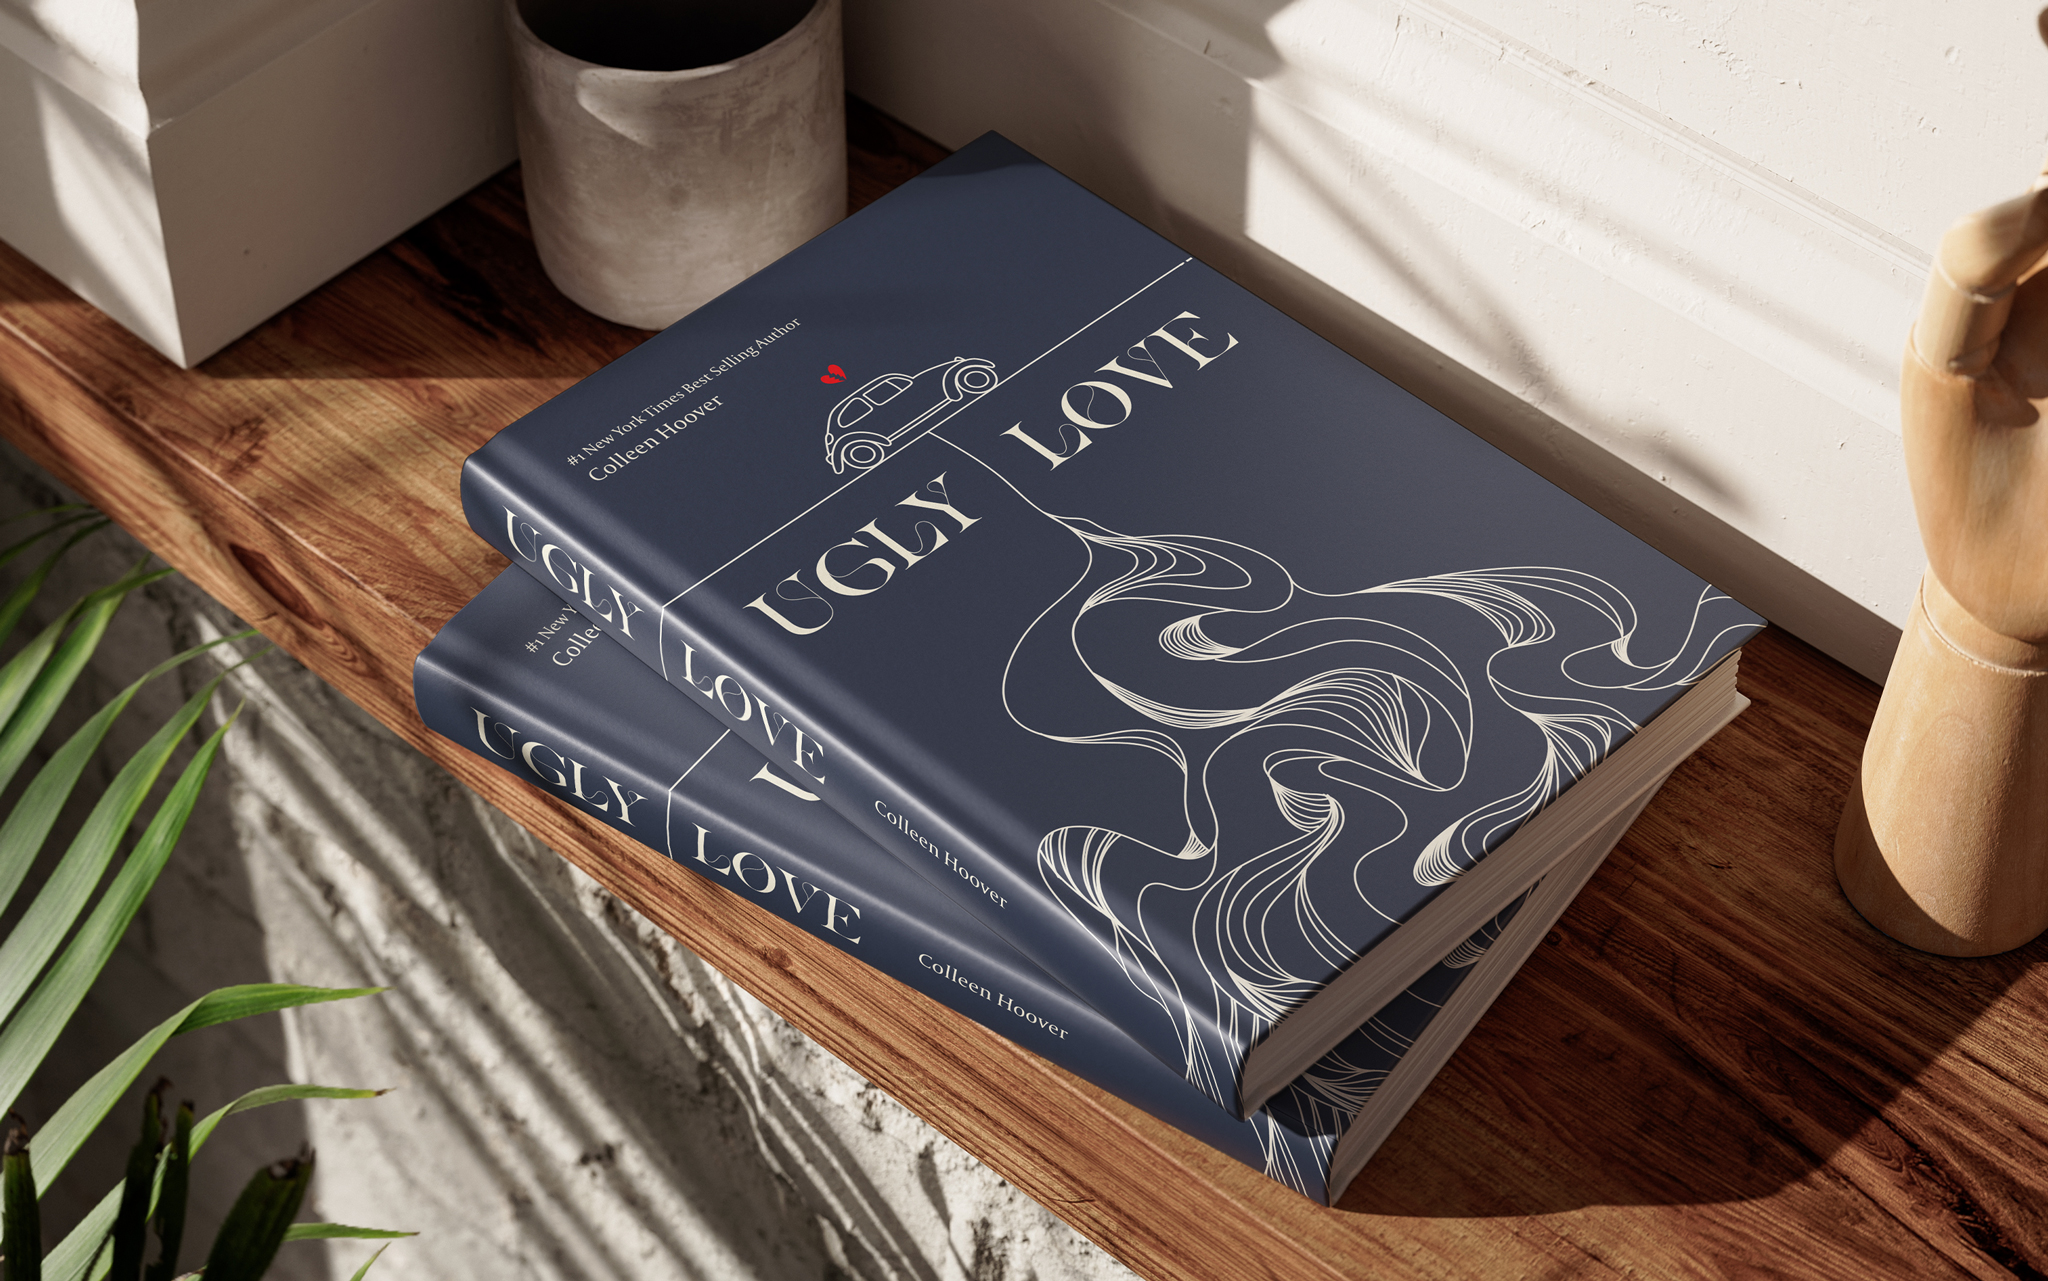 Mockup of a book cover dust jacket redesign for the book Ugly Love.